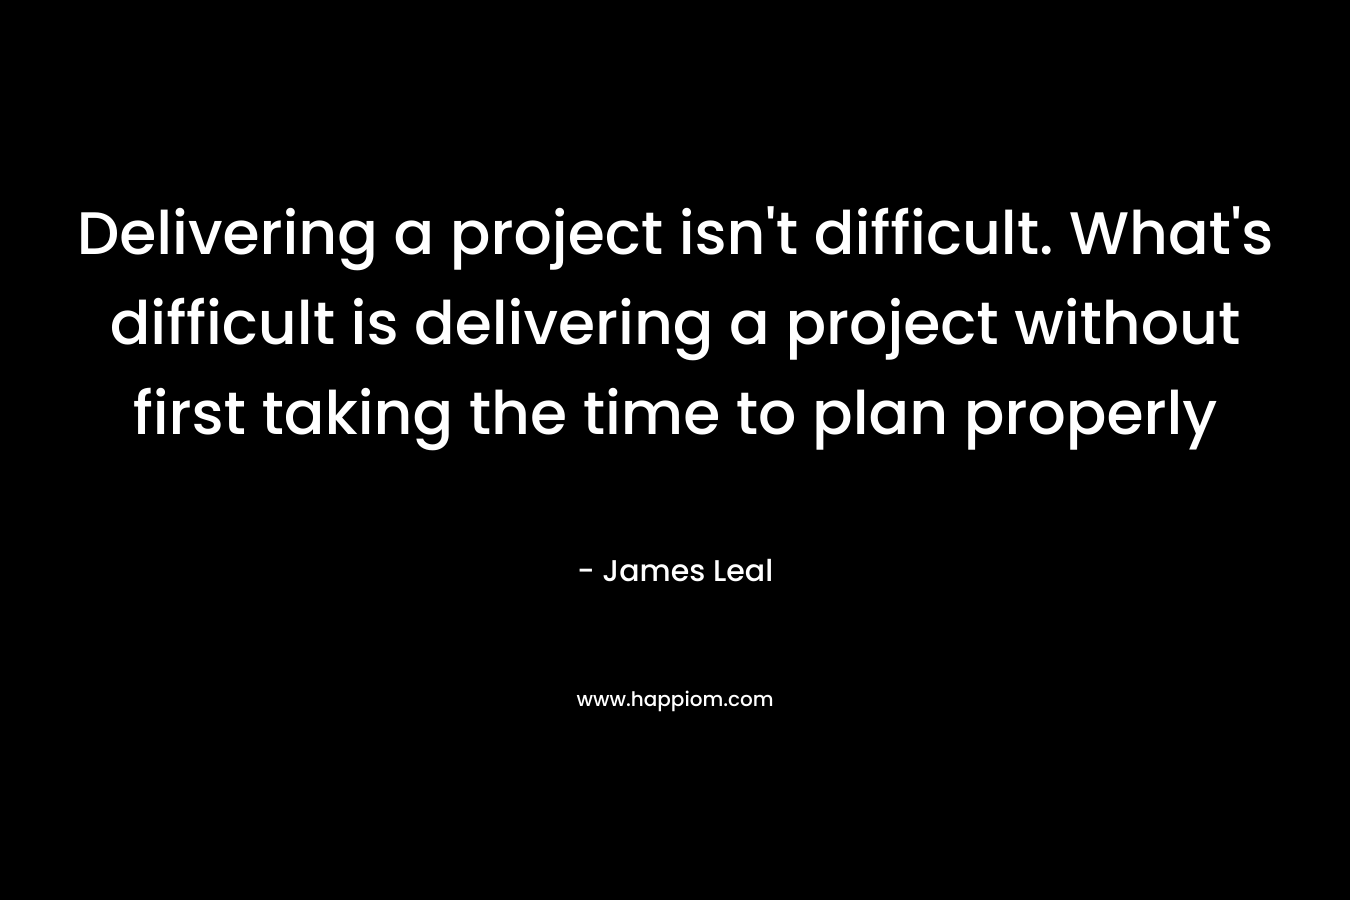 Delivering a project isn't difficult. What's difficult is delivering a project without first taking the time to plan properly